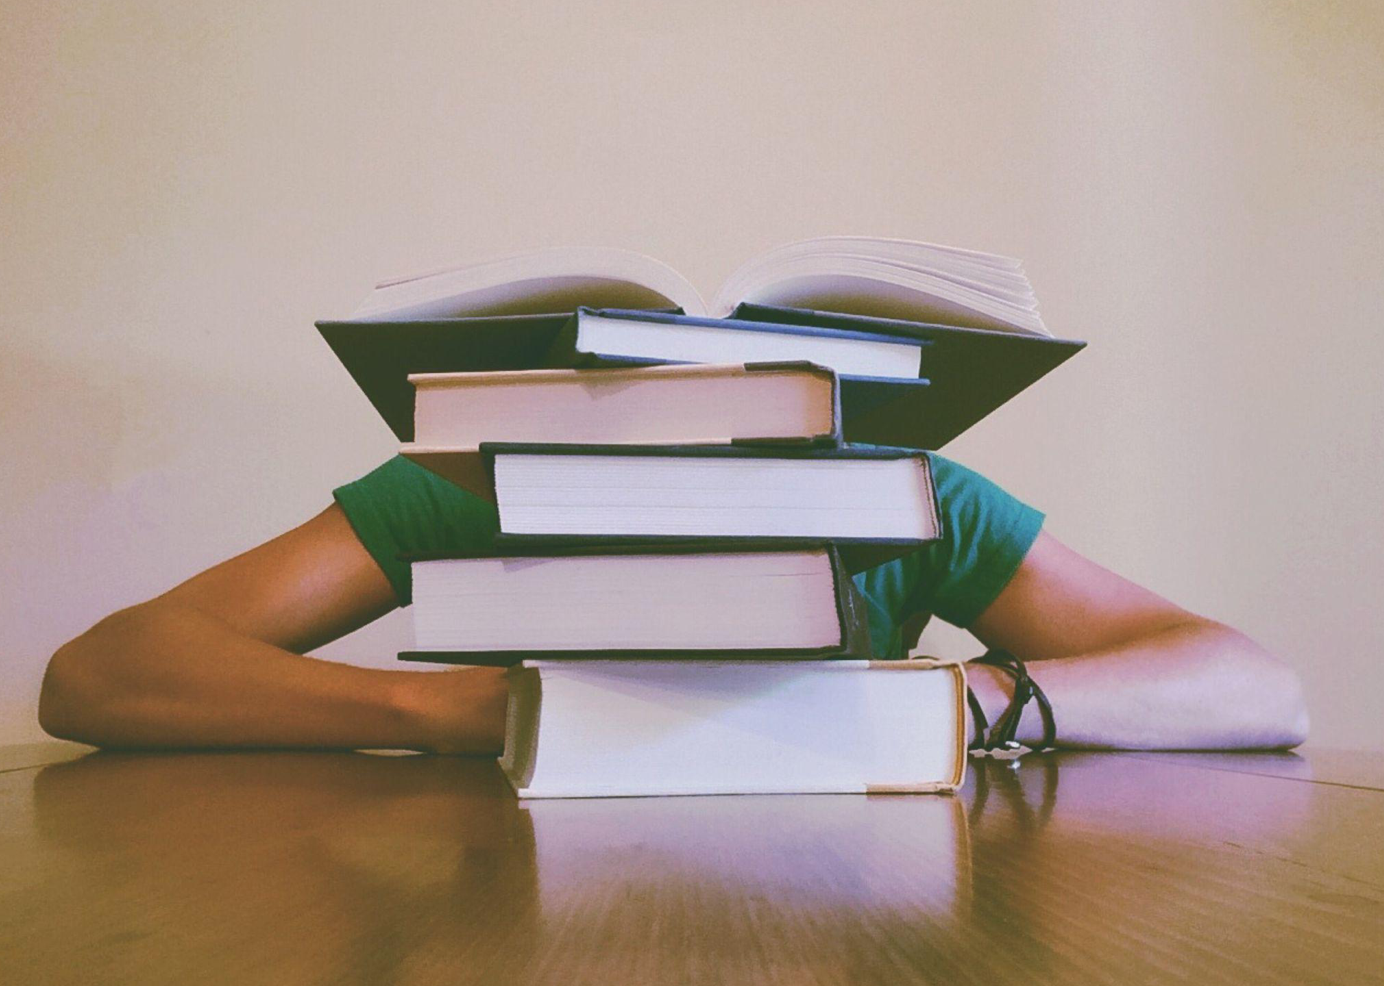 Student hiding behind stacks of books; image by Pixabay, via Pexels.com.